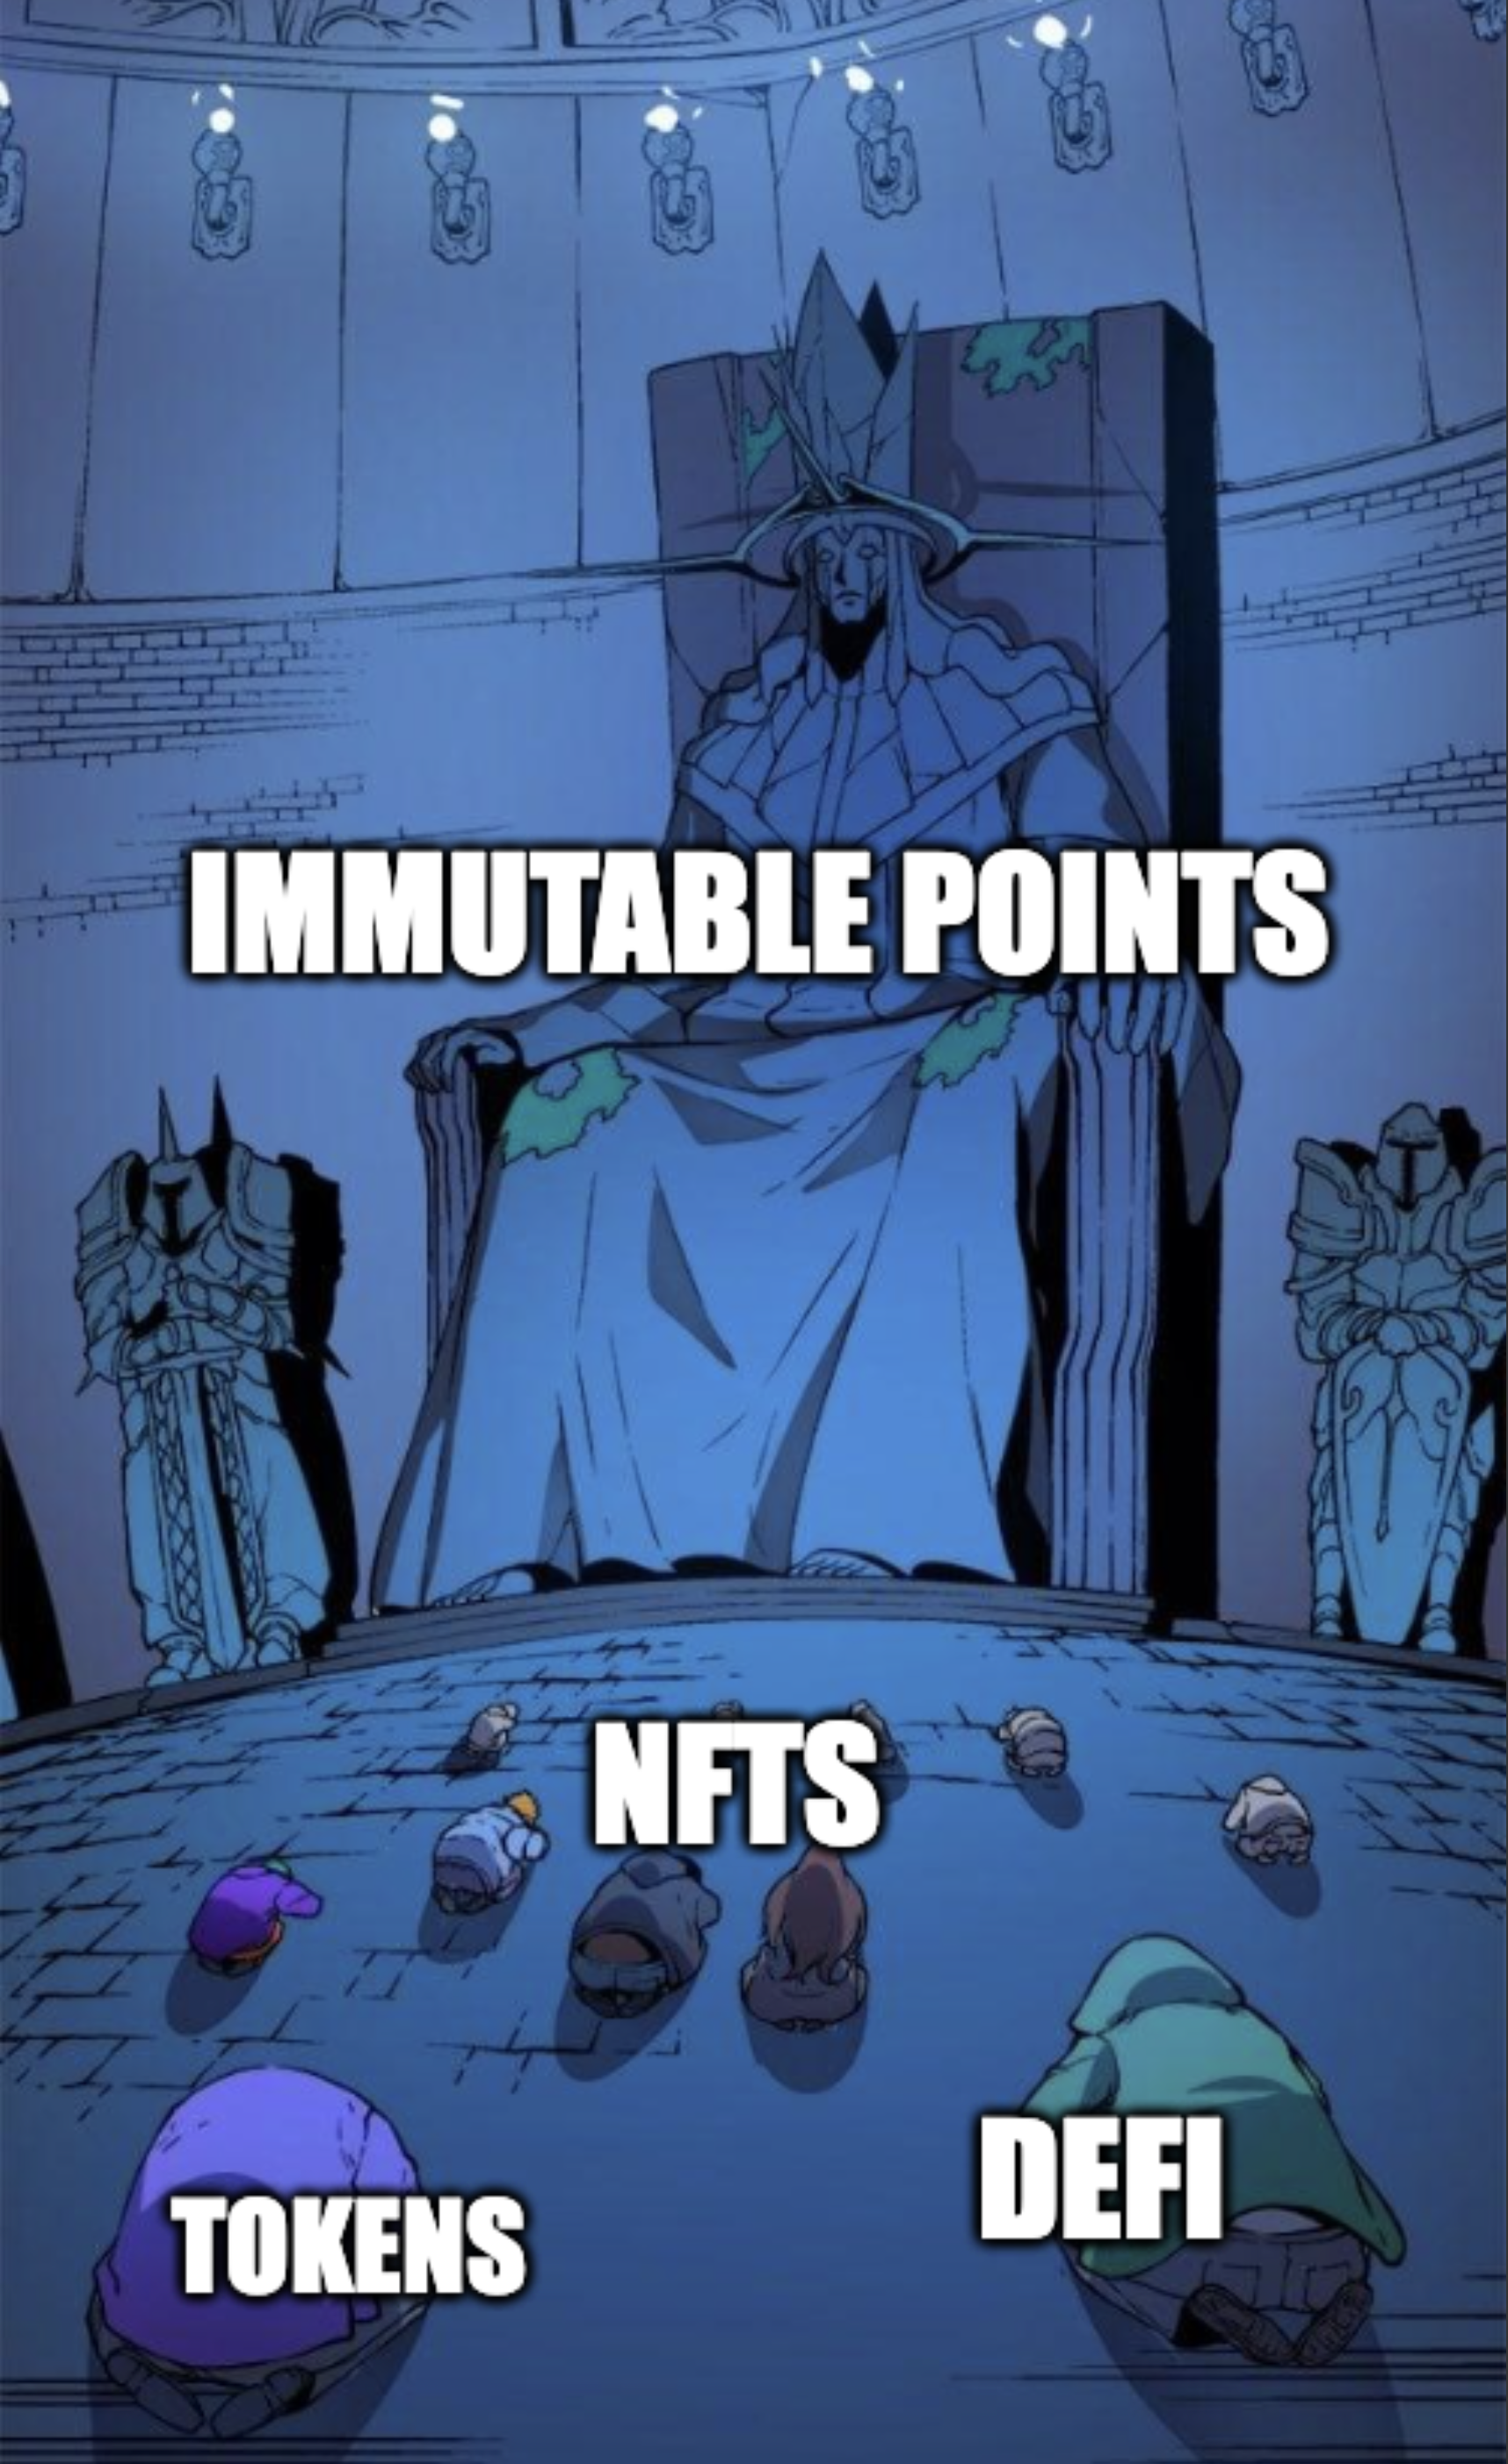 Immutable Points are 